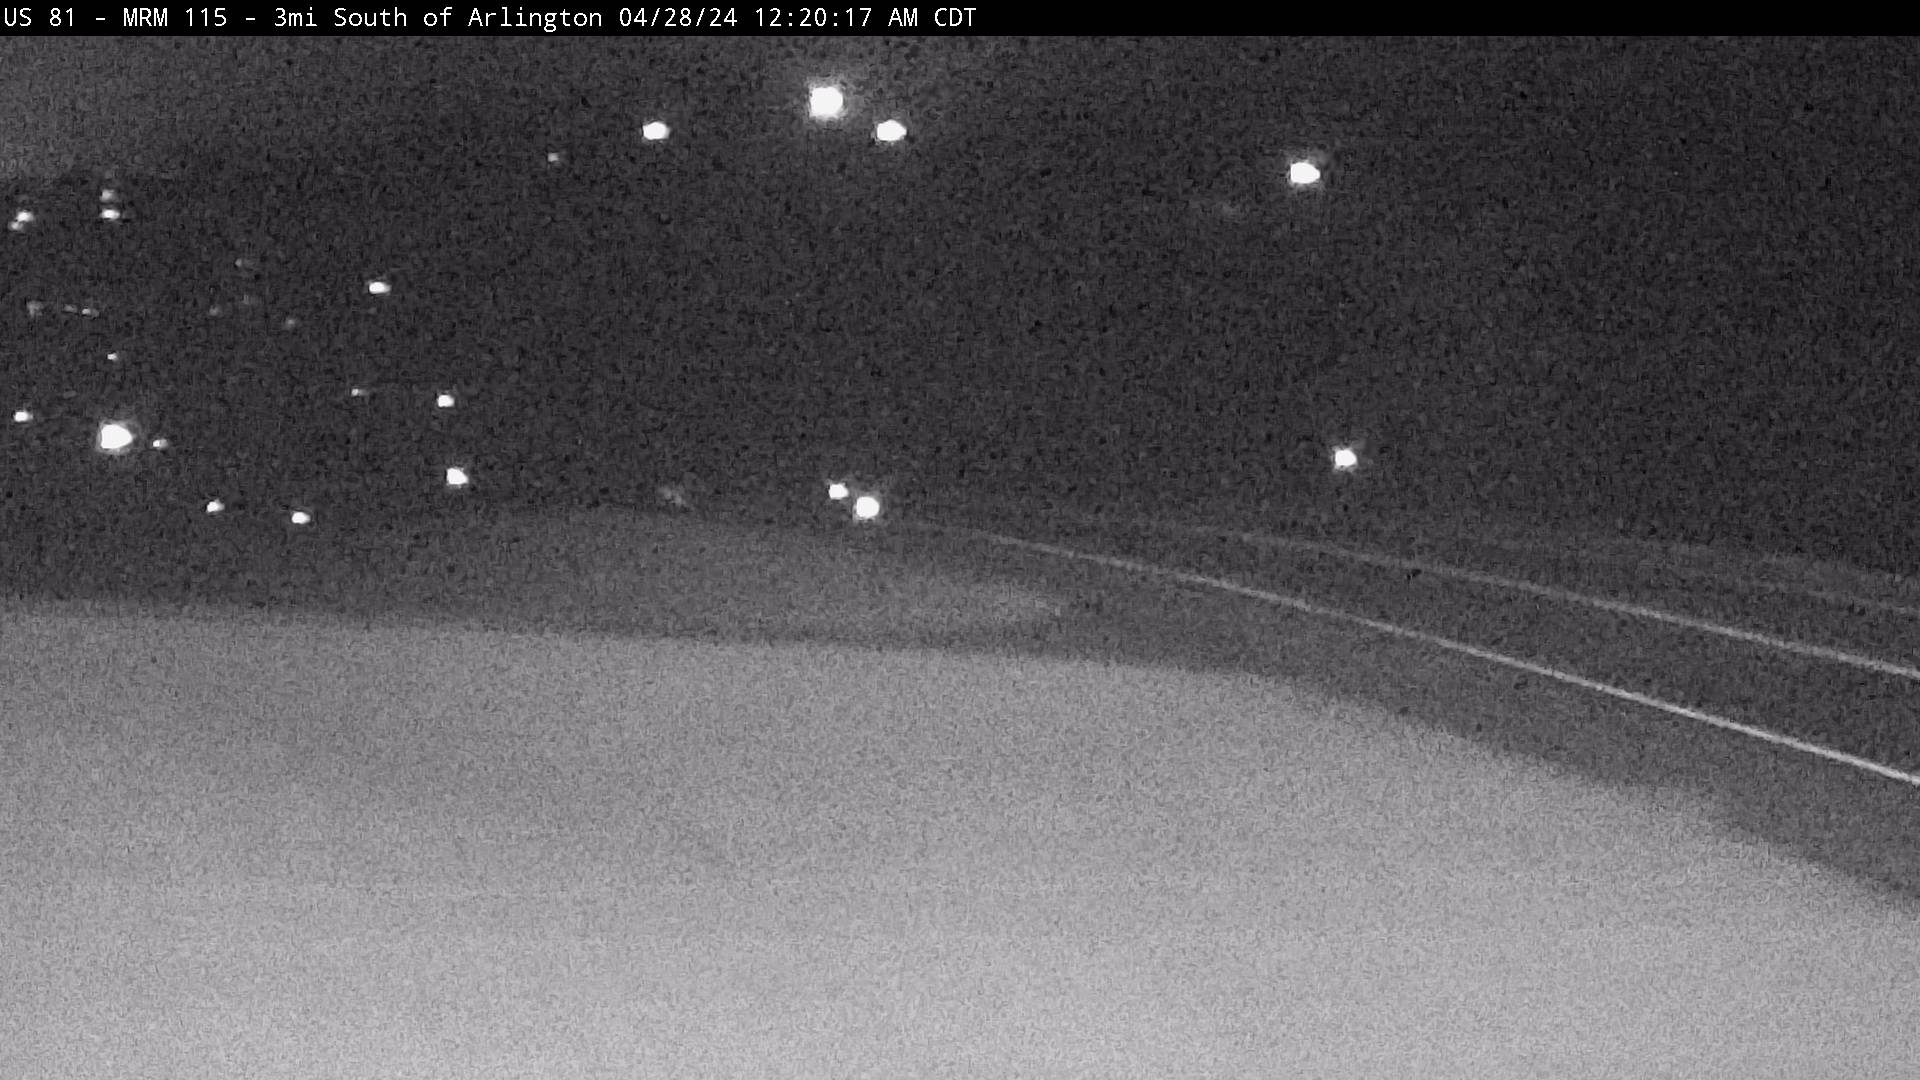 3 miles south of town along US-81 @ MP 115 - North Traffic Camera